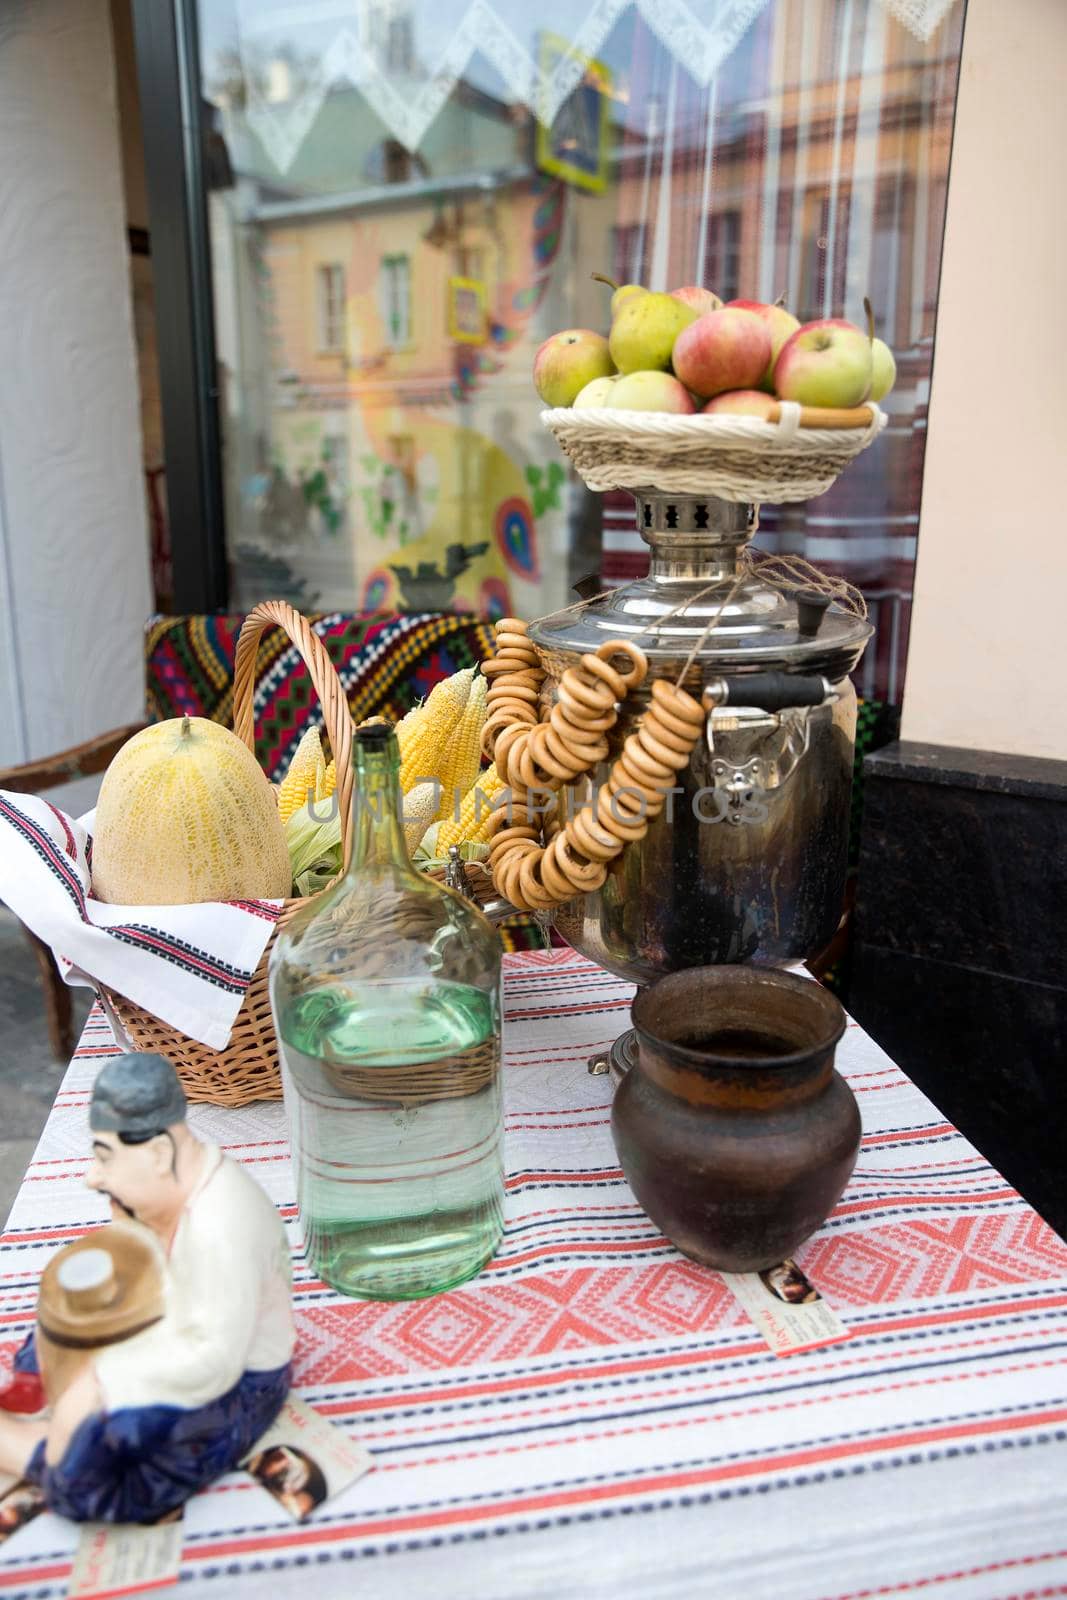 Table decoration - a bottle of Ukrainian vodka, a samovar, a basket of apples, bagels on a rope, embroidered towels, a clay pot, a sculpture of a Ukrainian.